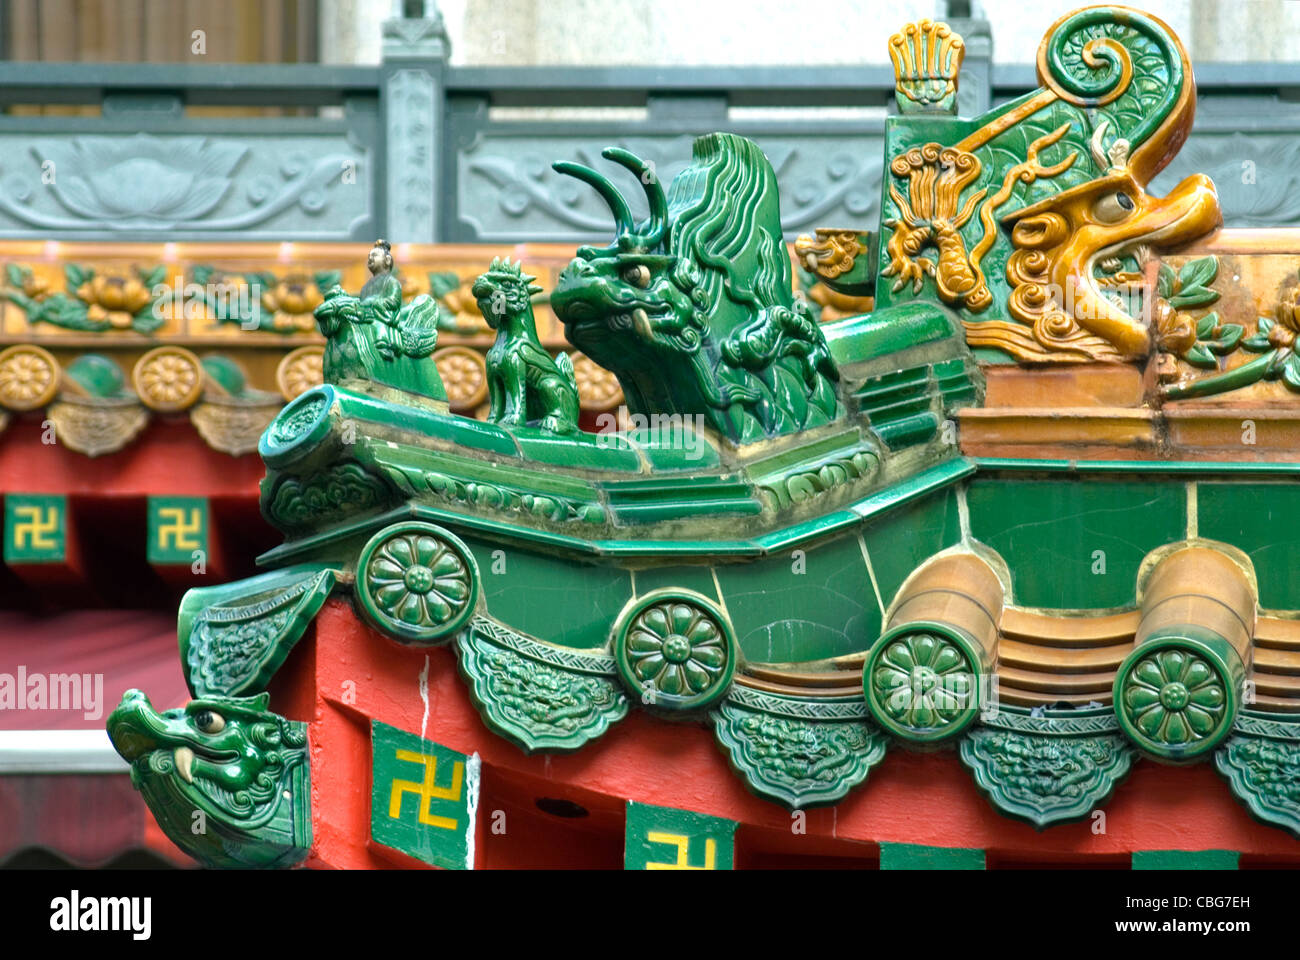 Chinese ceramic roof tile at the Kwan Im Thong Hood Cho Temple in Bugis, Singapore. Stock Photo